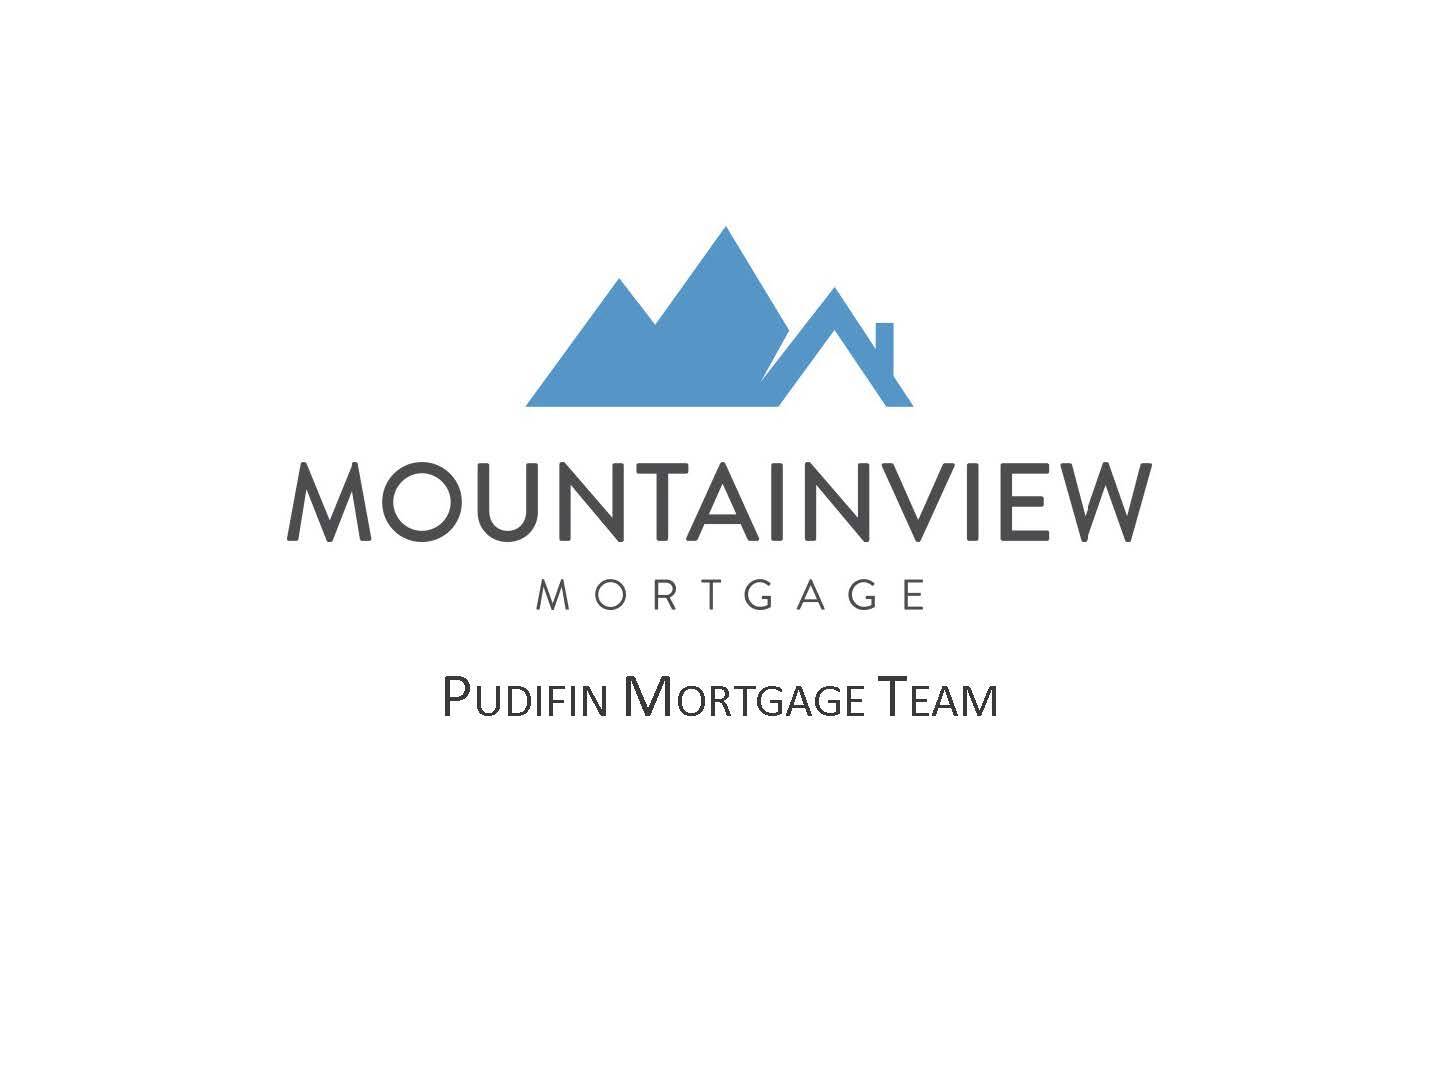 Pudifin Mountainview Mortgage Team